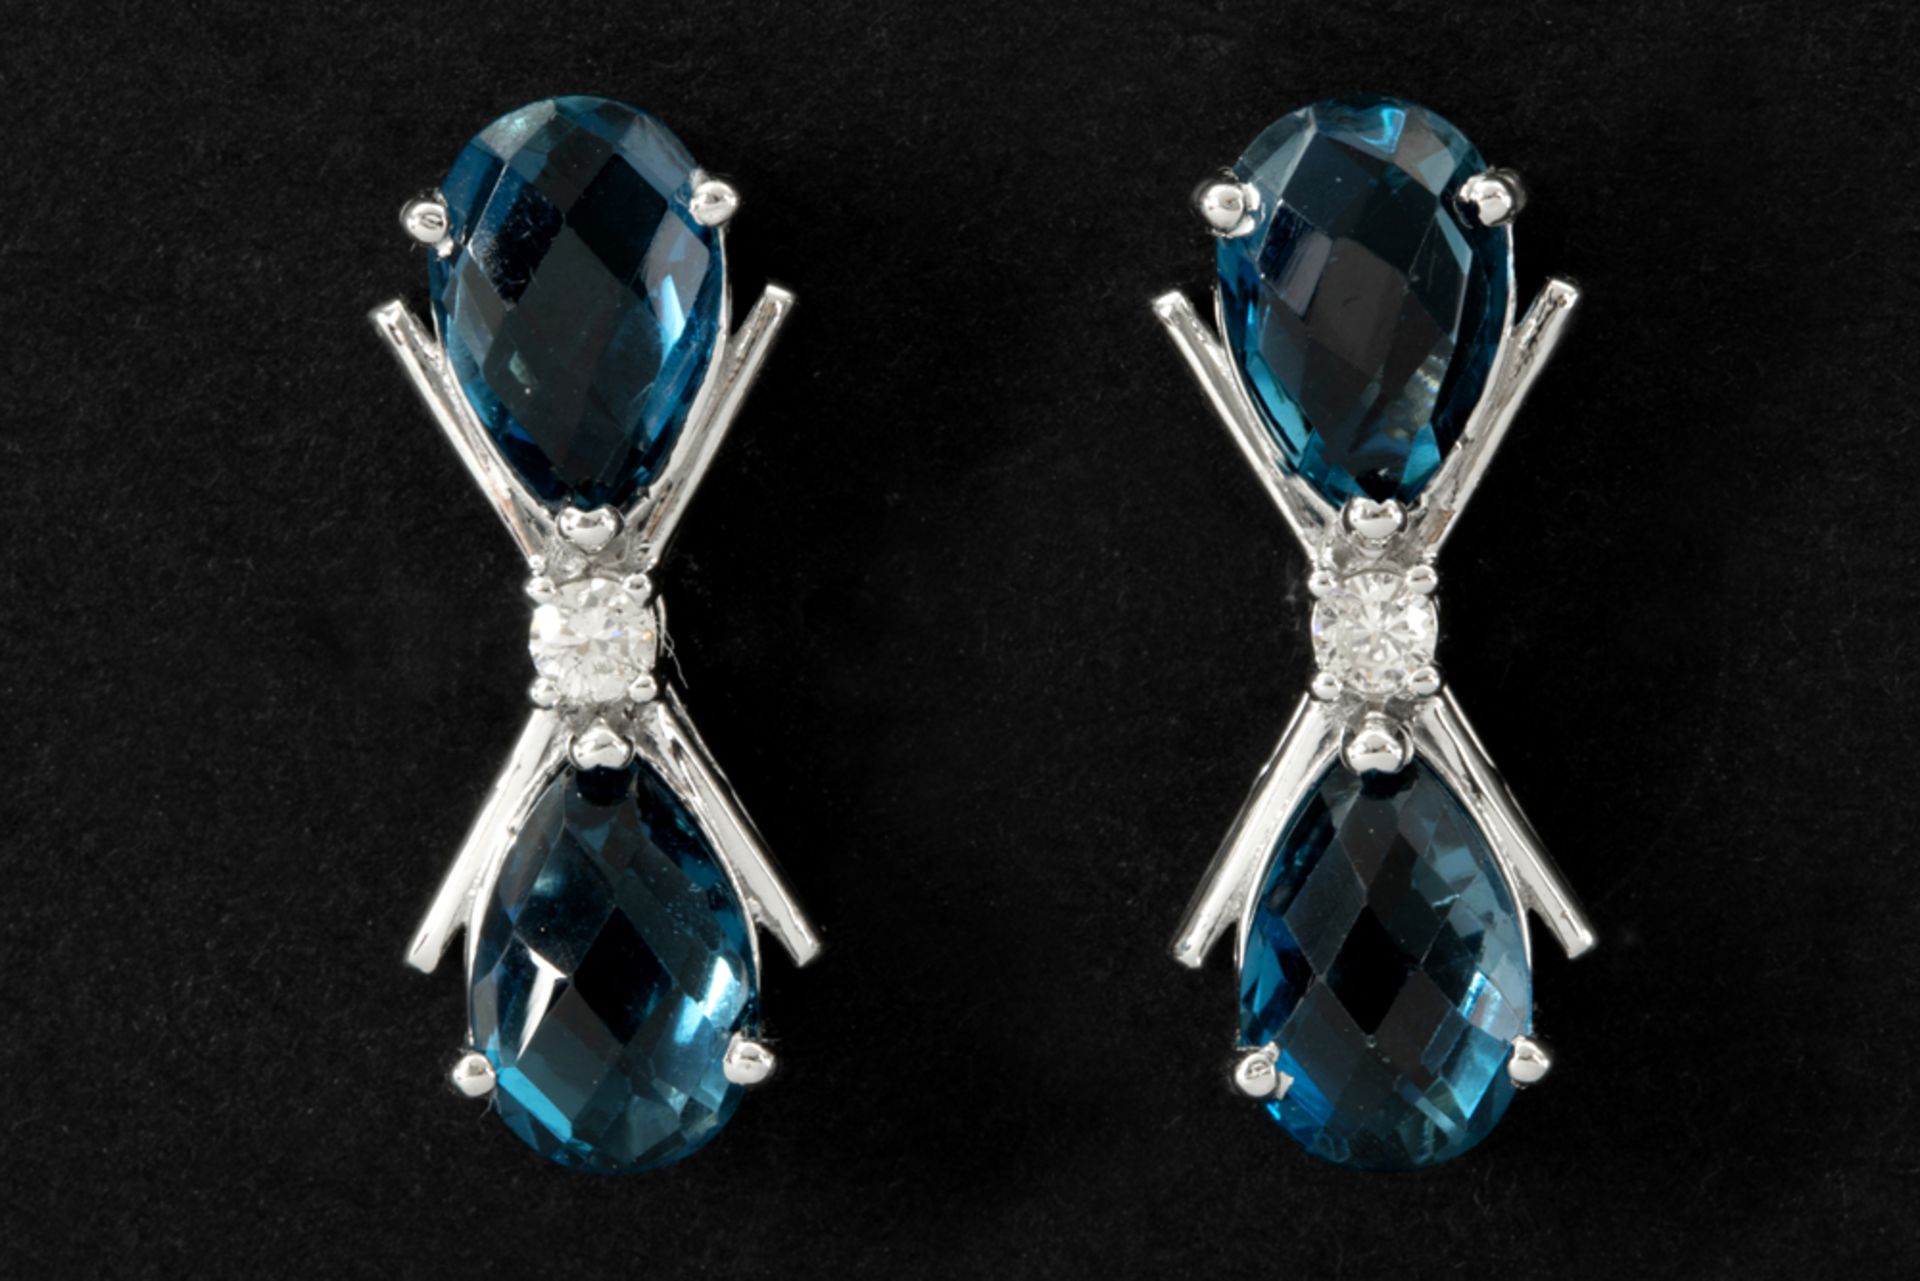 pair of X-shaped earrings in white gold (18 carat) with more then 7 carat of London Topaz with the